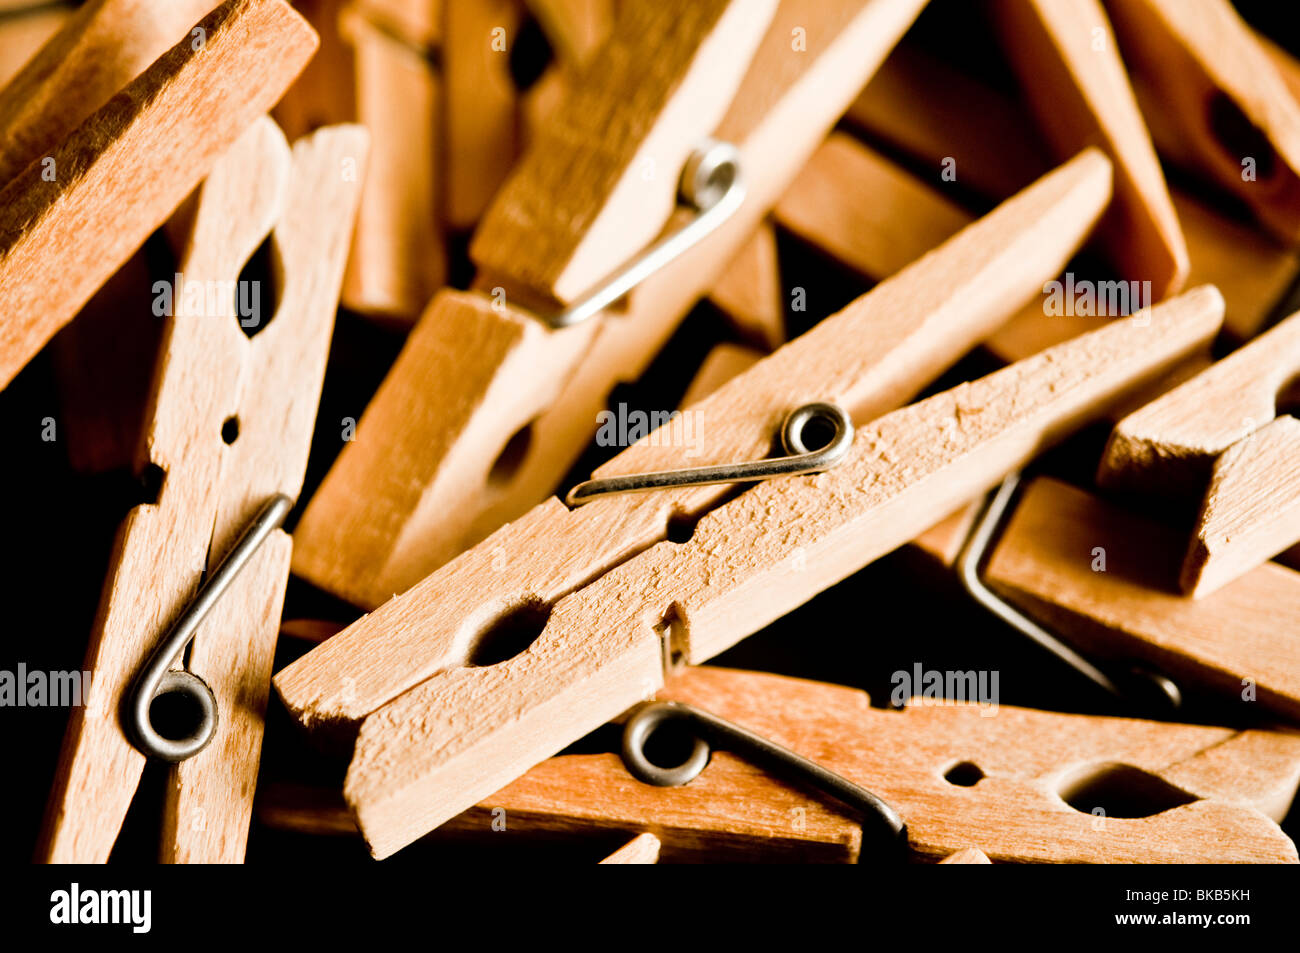 Wooden Pegs - a close up view. Stock Photo